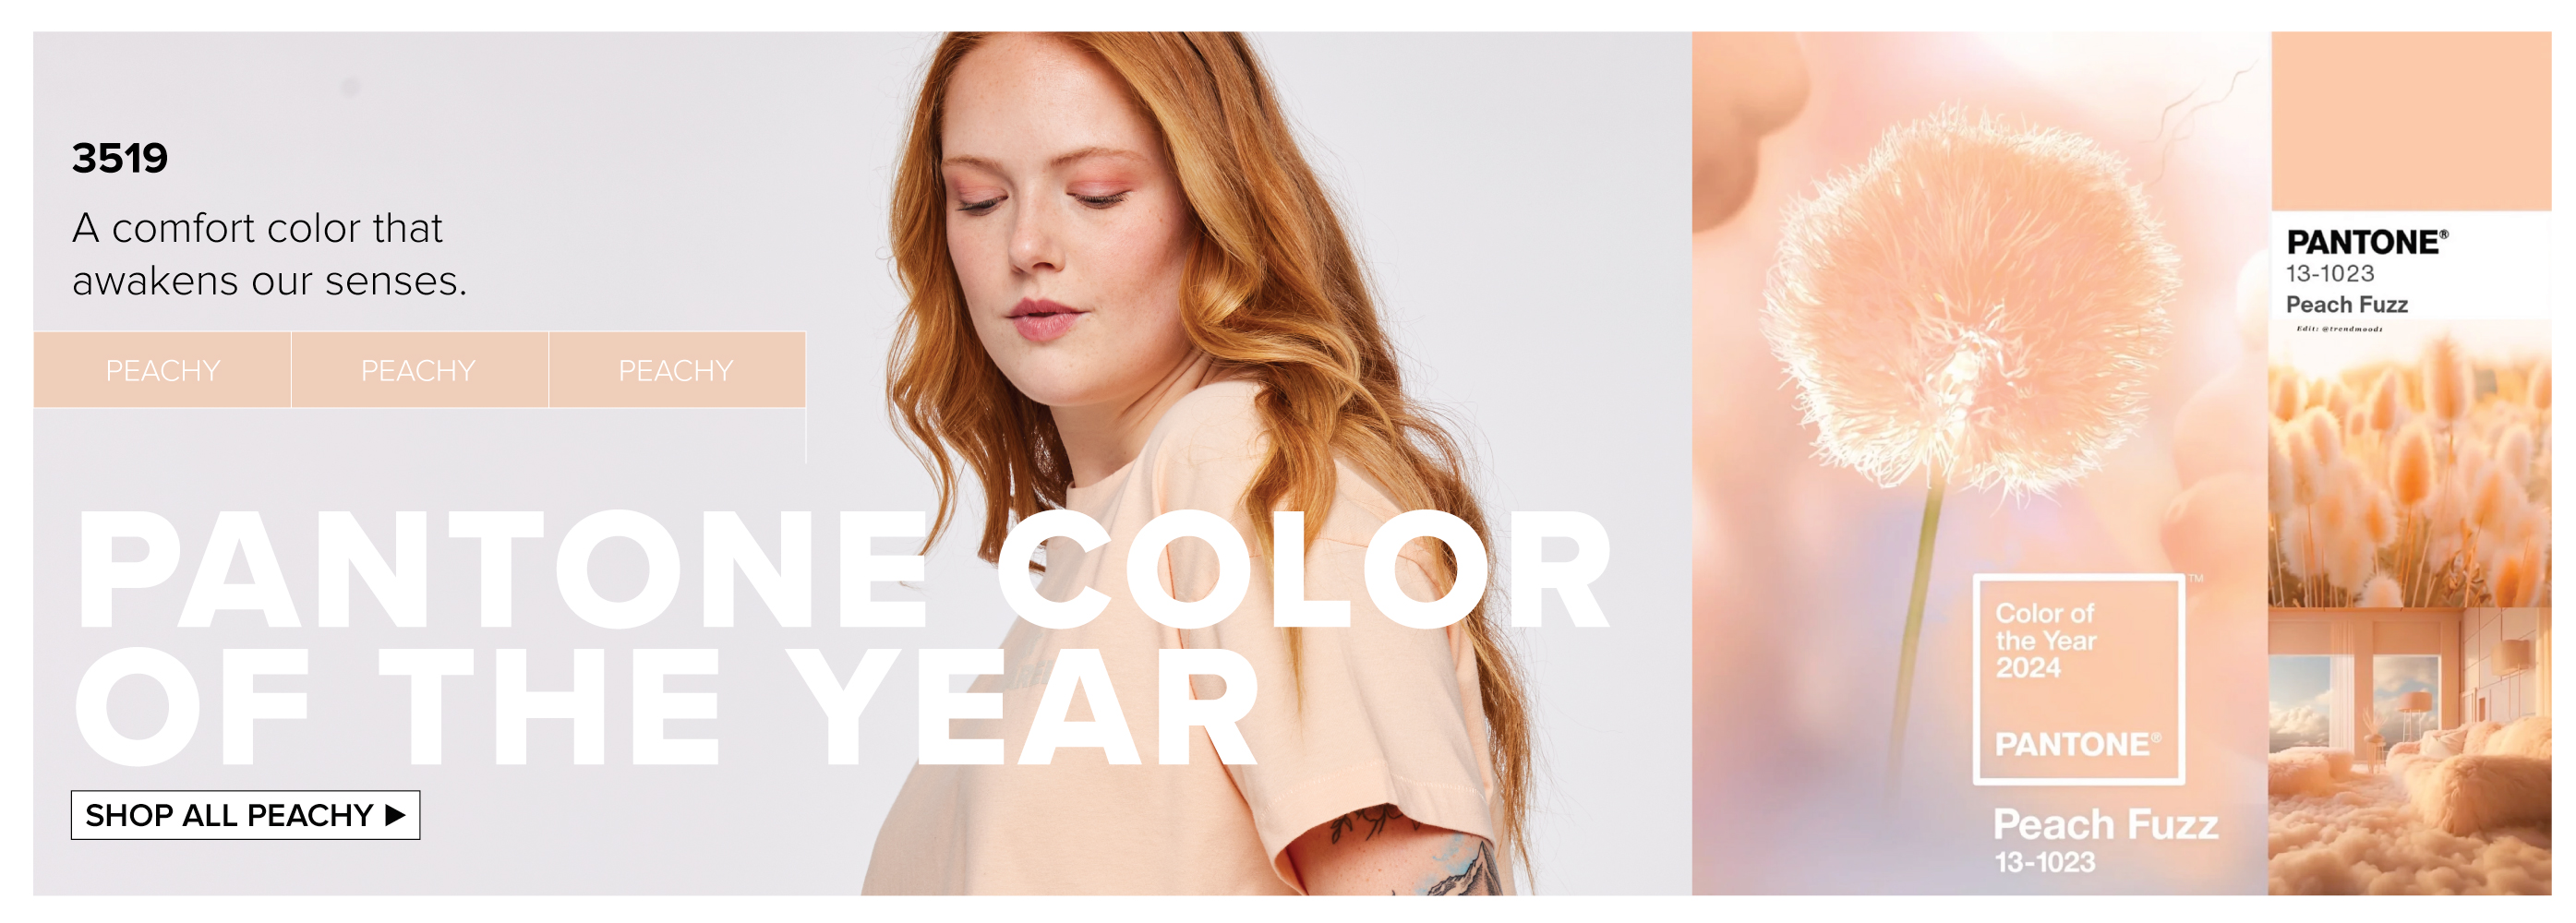 Pantone Color of the Year:  3519